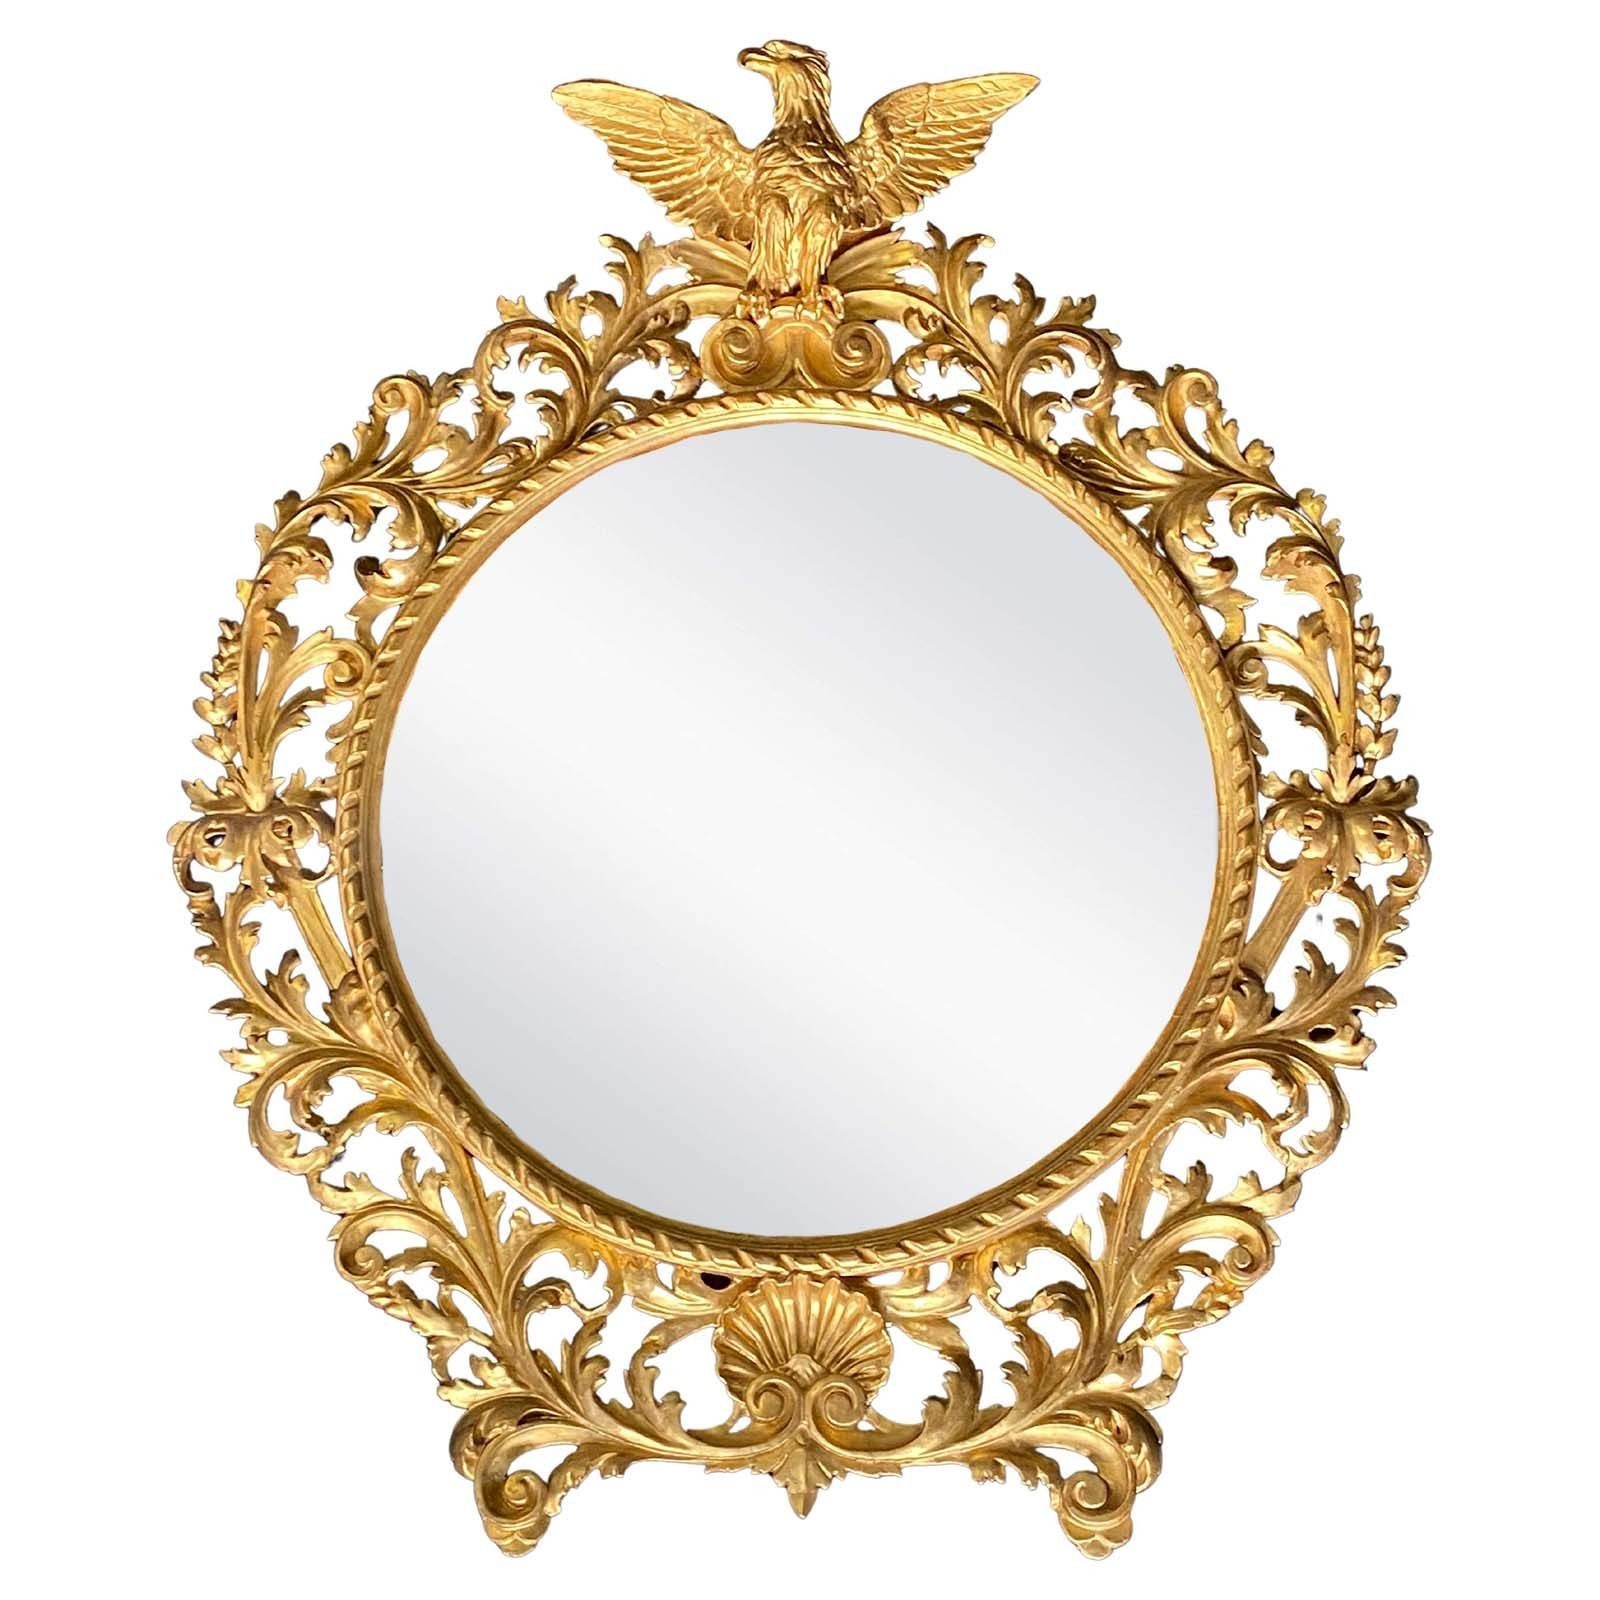 What are concave mirrors?